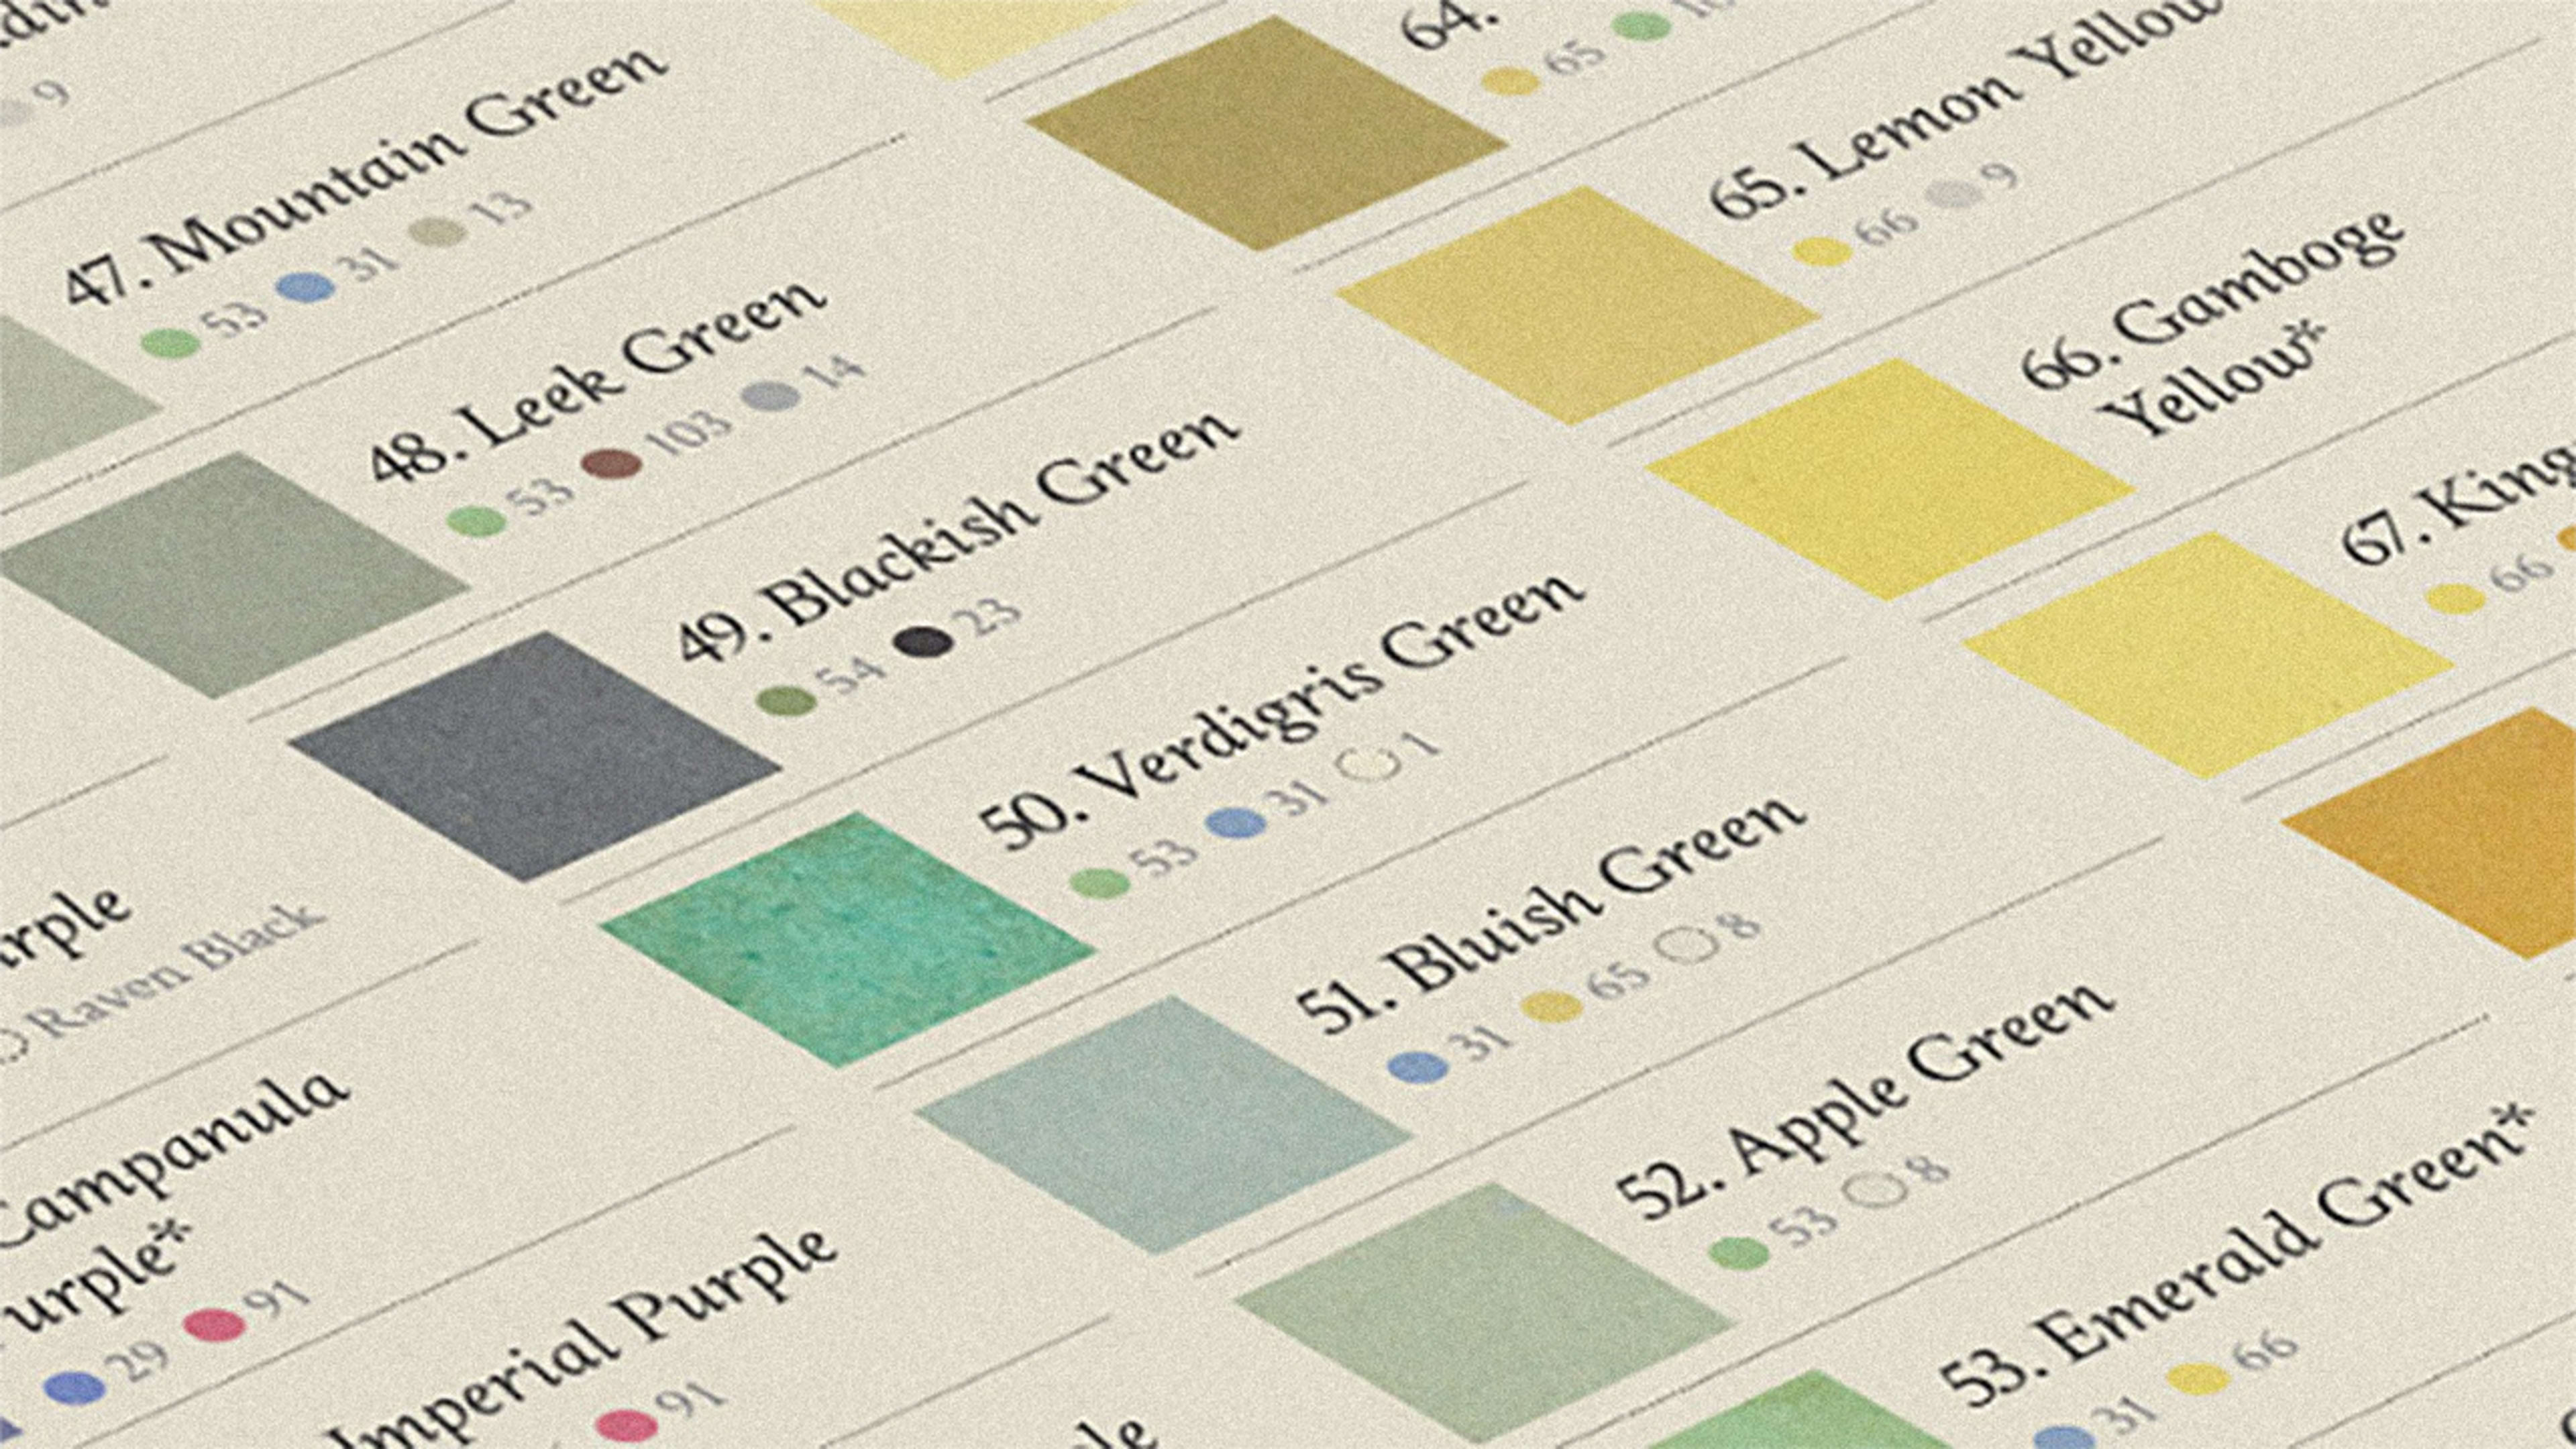 A 200-year-old guide to color, redesigned for the internet age